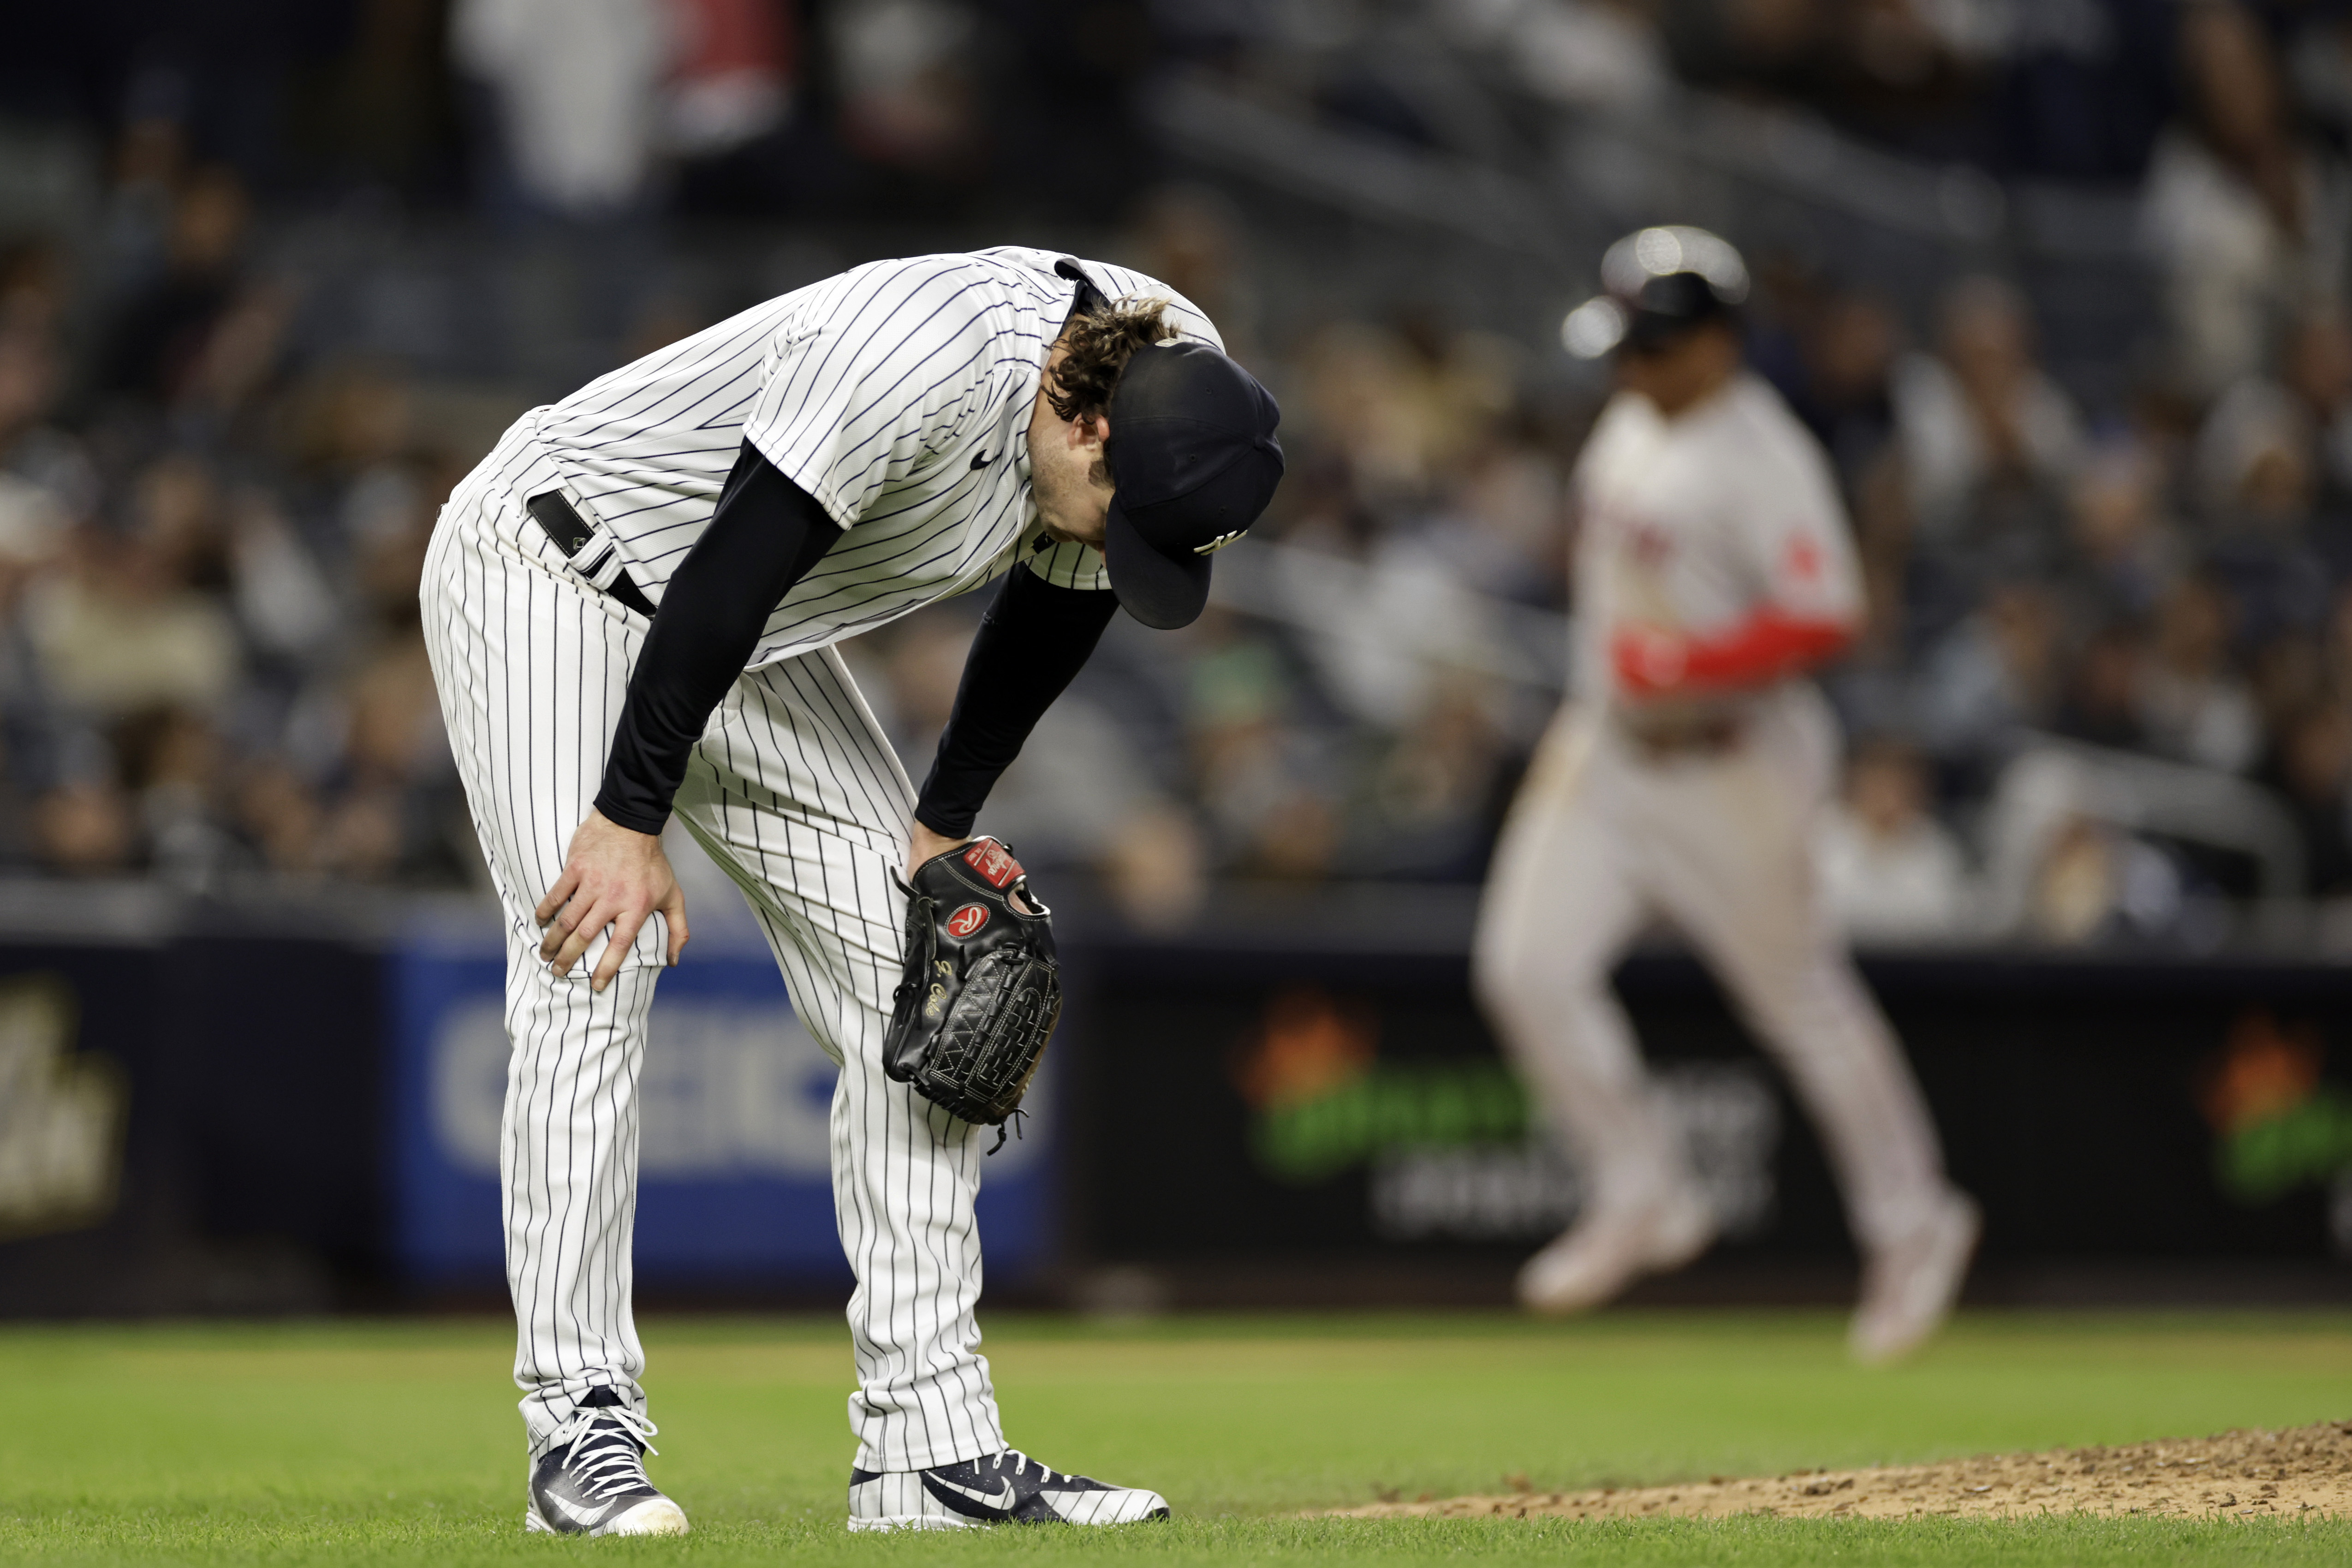 Yankees' Gerrit Cole not planning to scale back workload